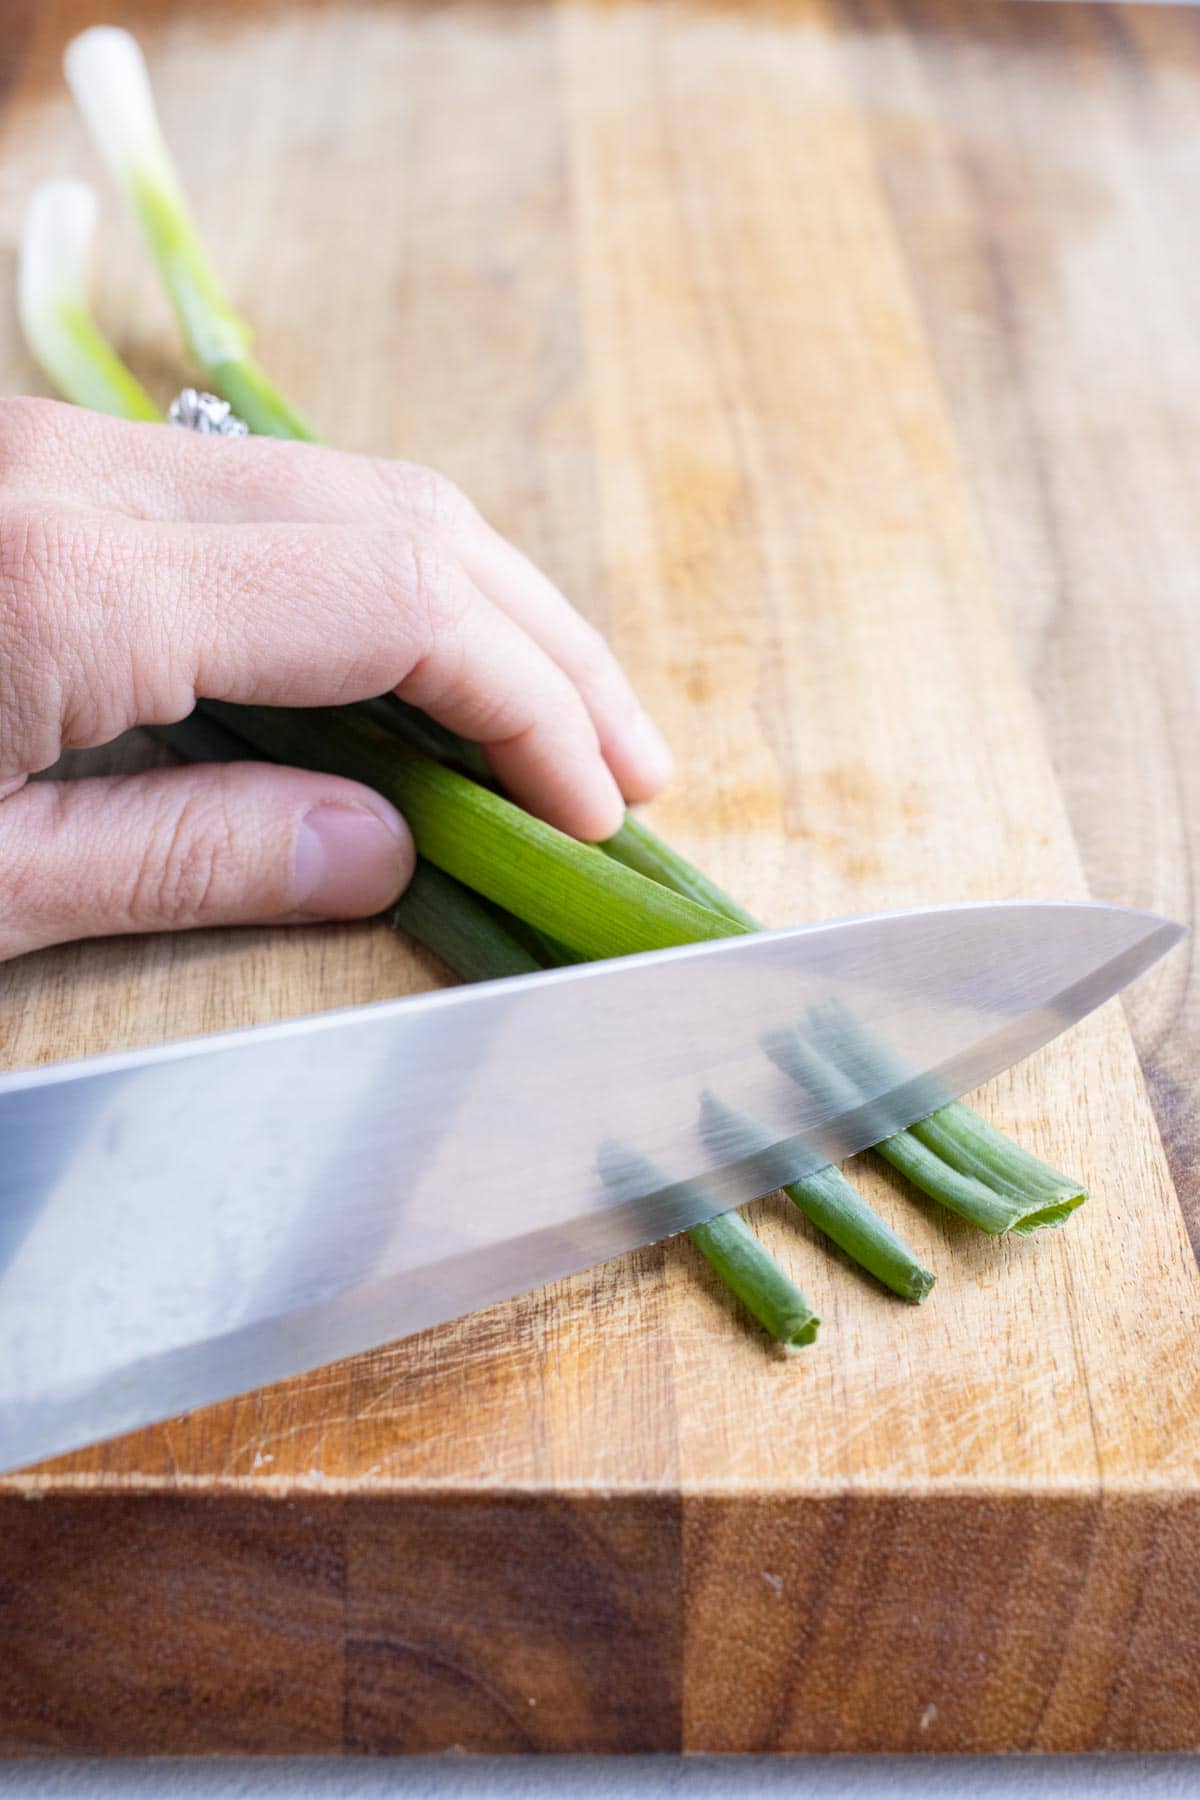 The tops of the green onions are trimmed with a knife.